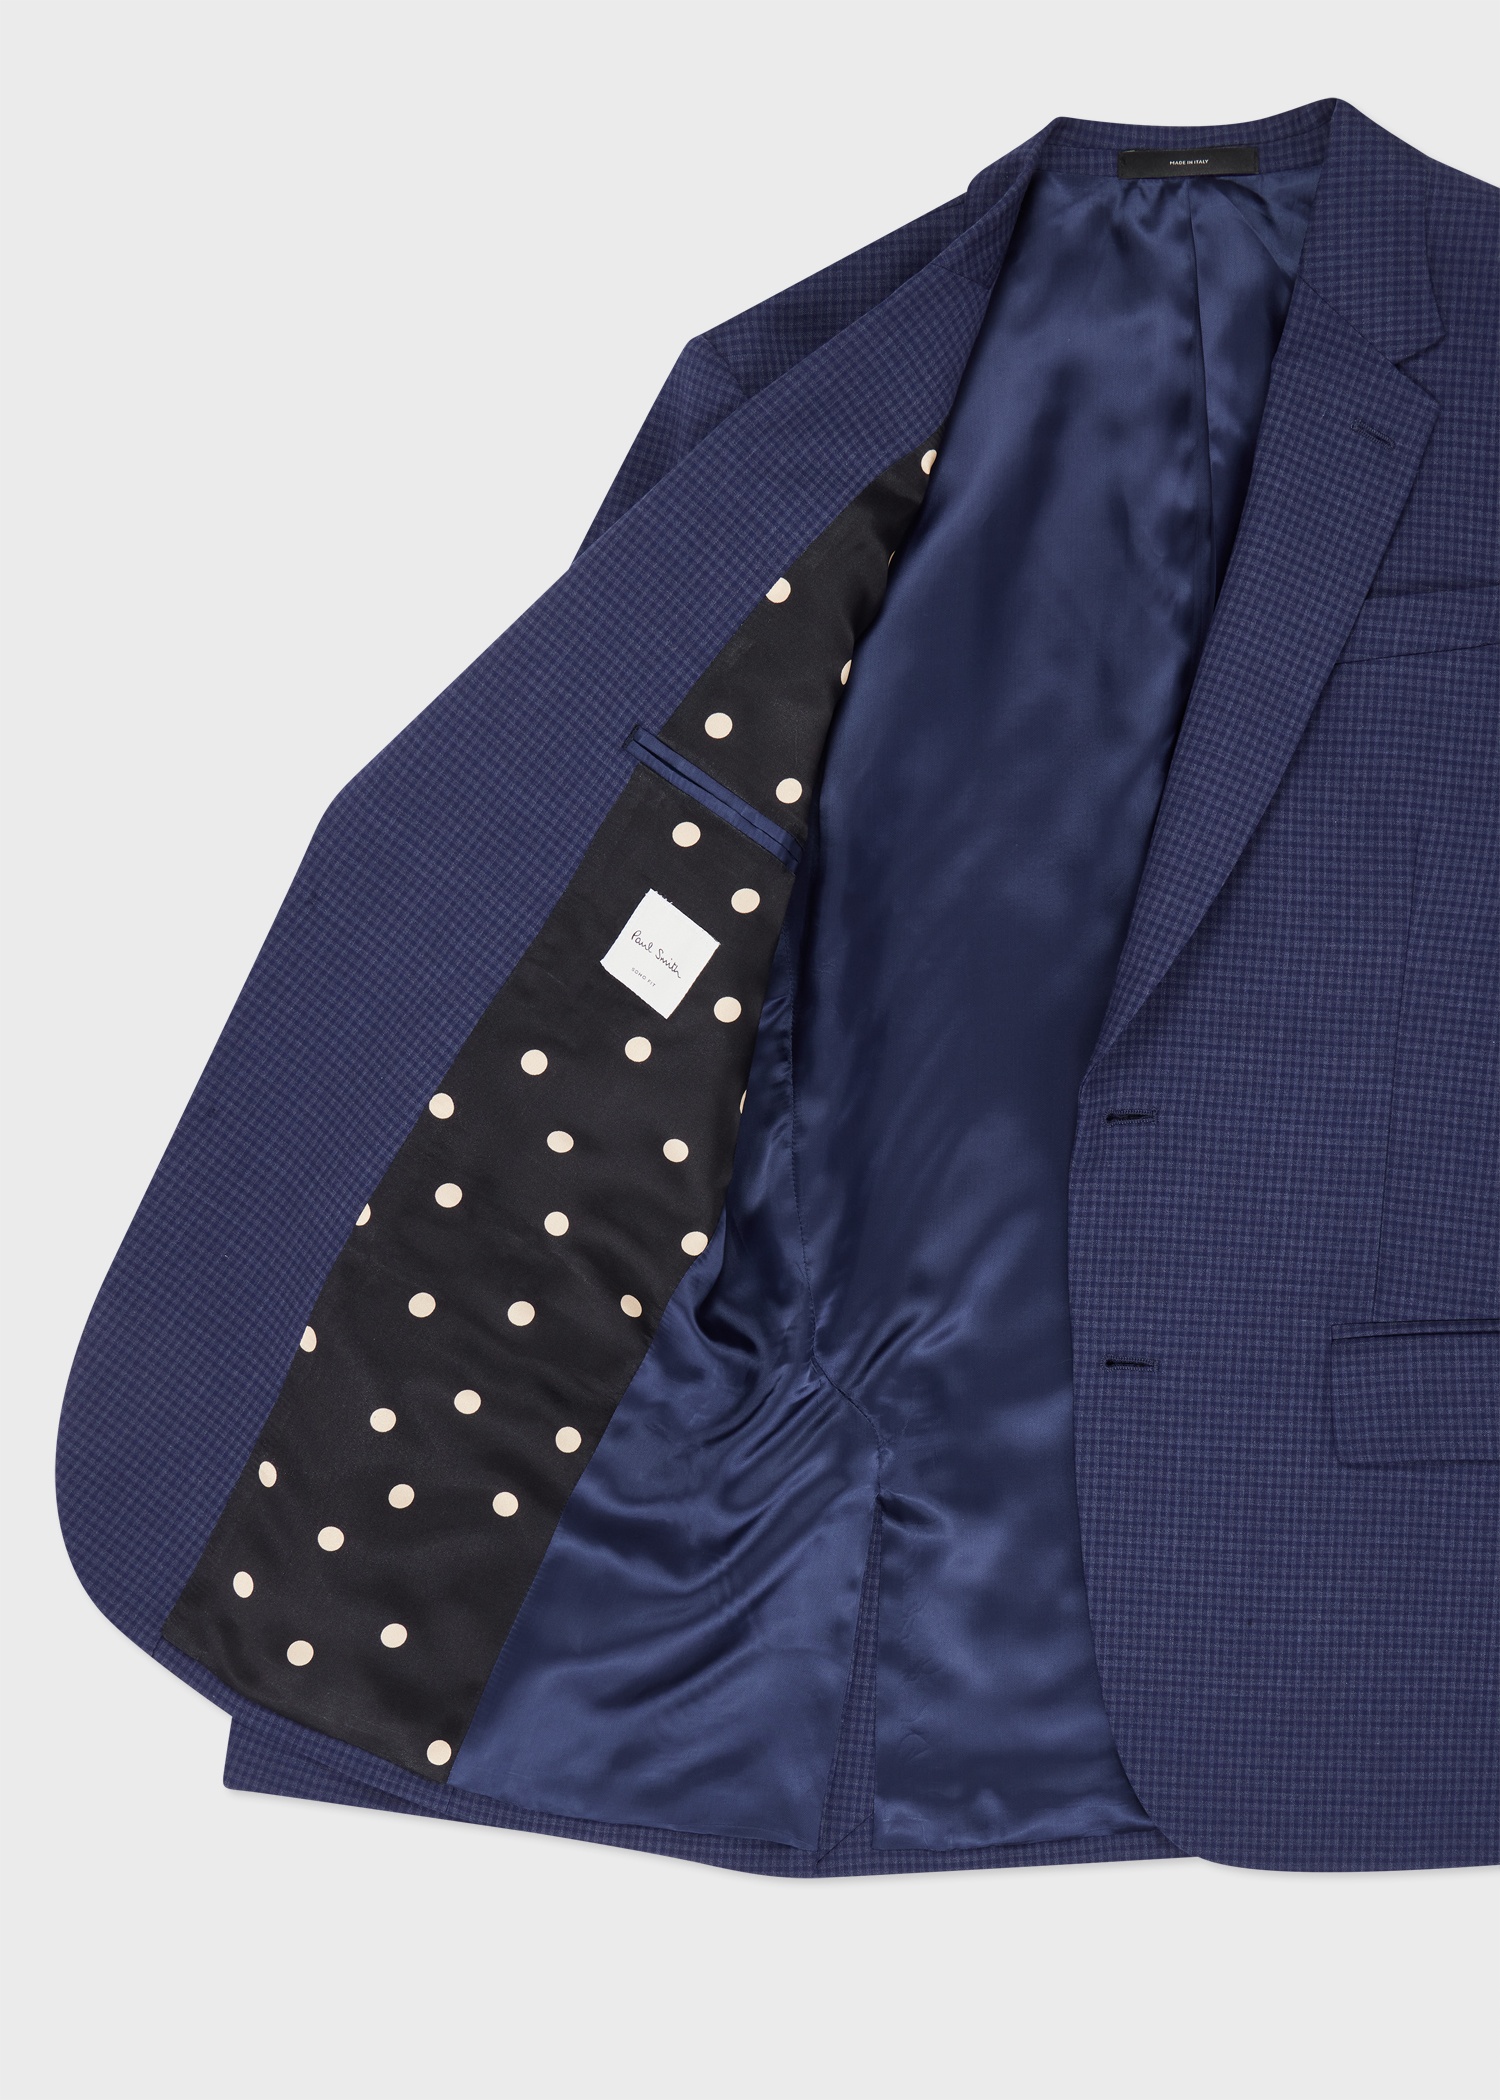 The Soho - Tailored-Fit Blue Gingham Wool Blazer - 4